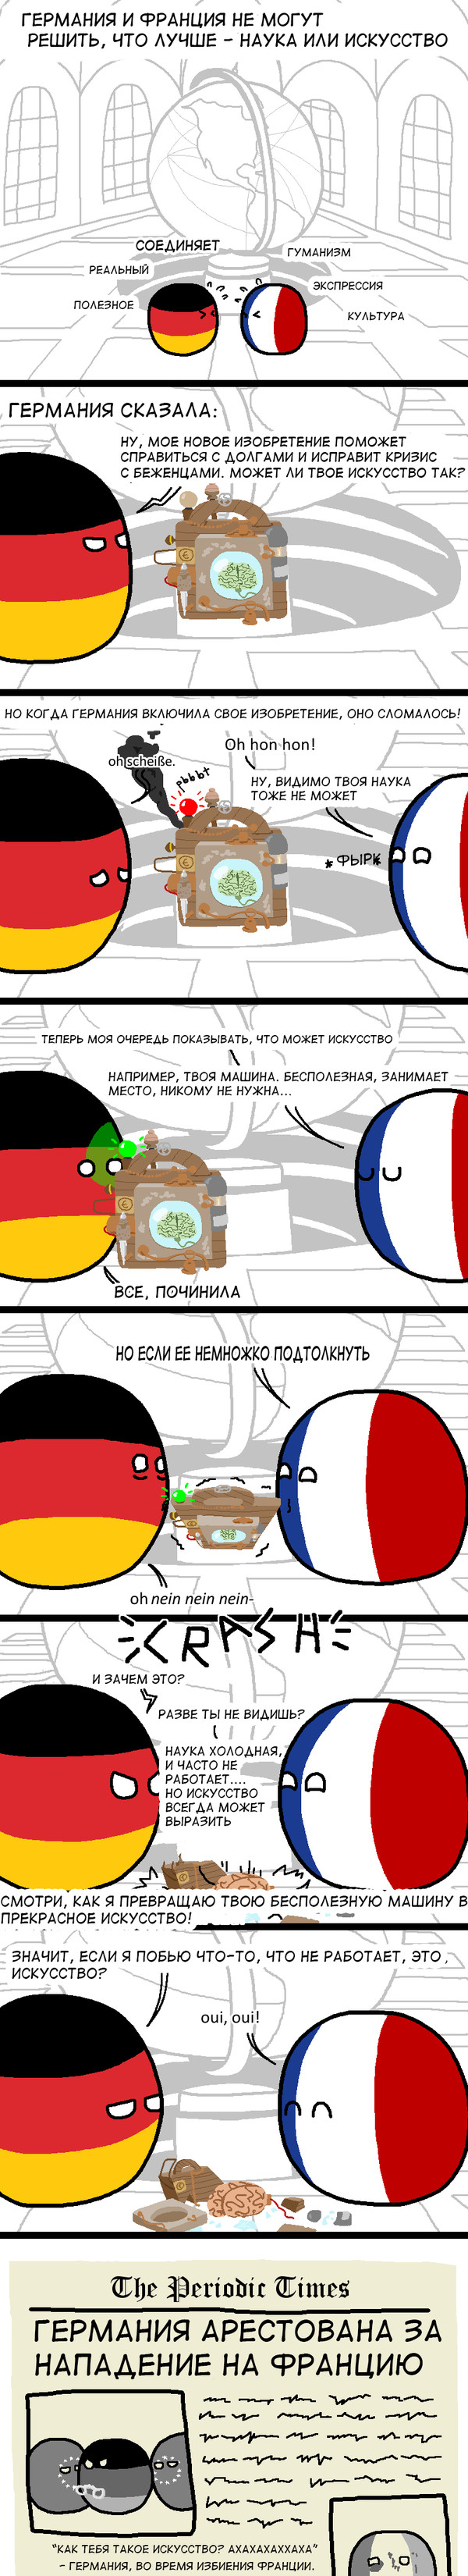 Science and Art - Countryballs, Translation, Reddit, Translated by myself, Germany, France, Humor, Longpost